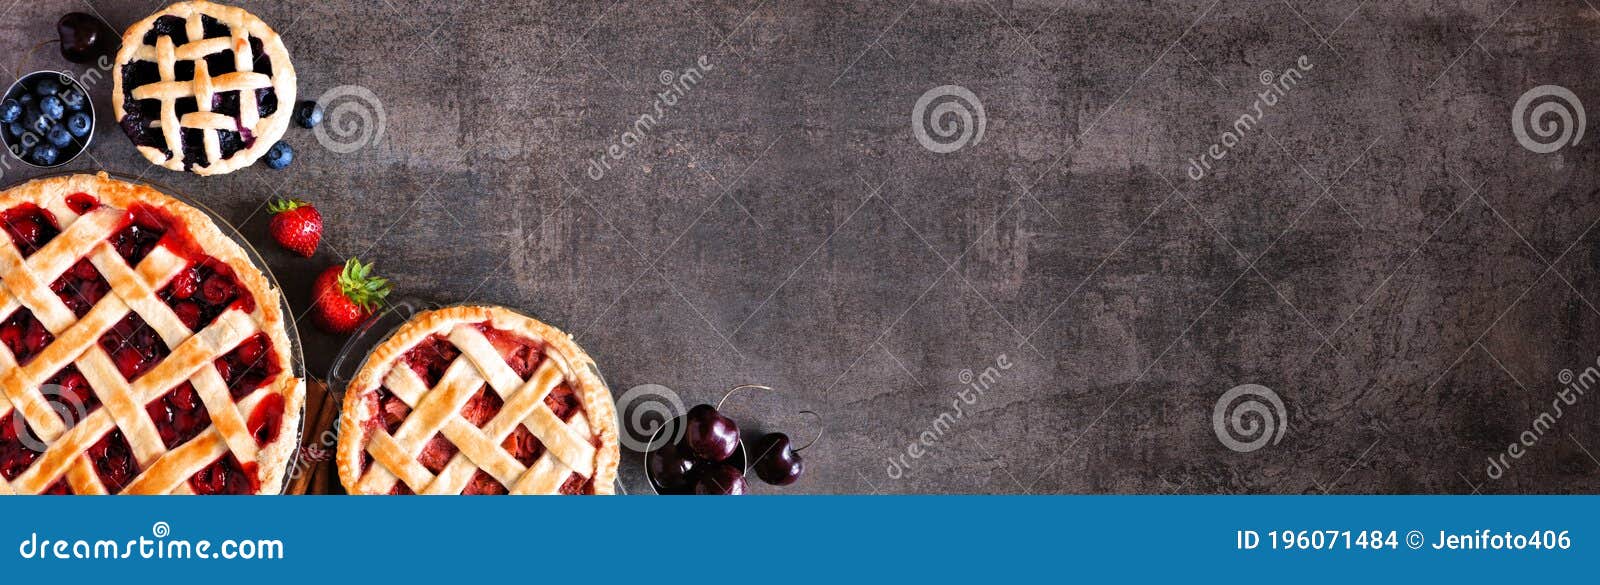 selection of fresh fruit pies. above view corner border over a dark stone background with copy space.